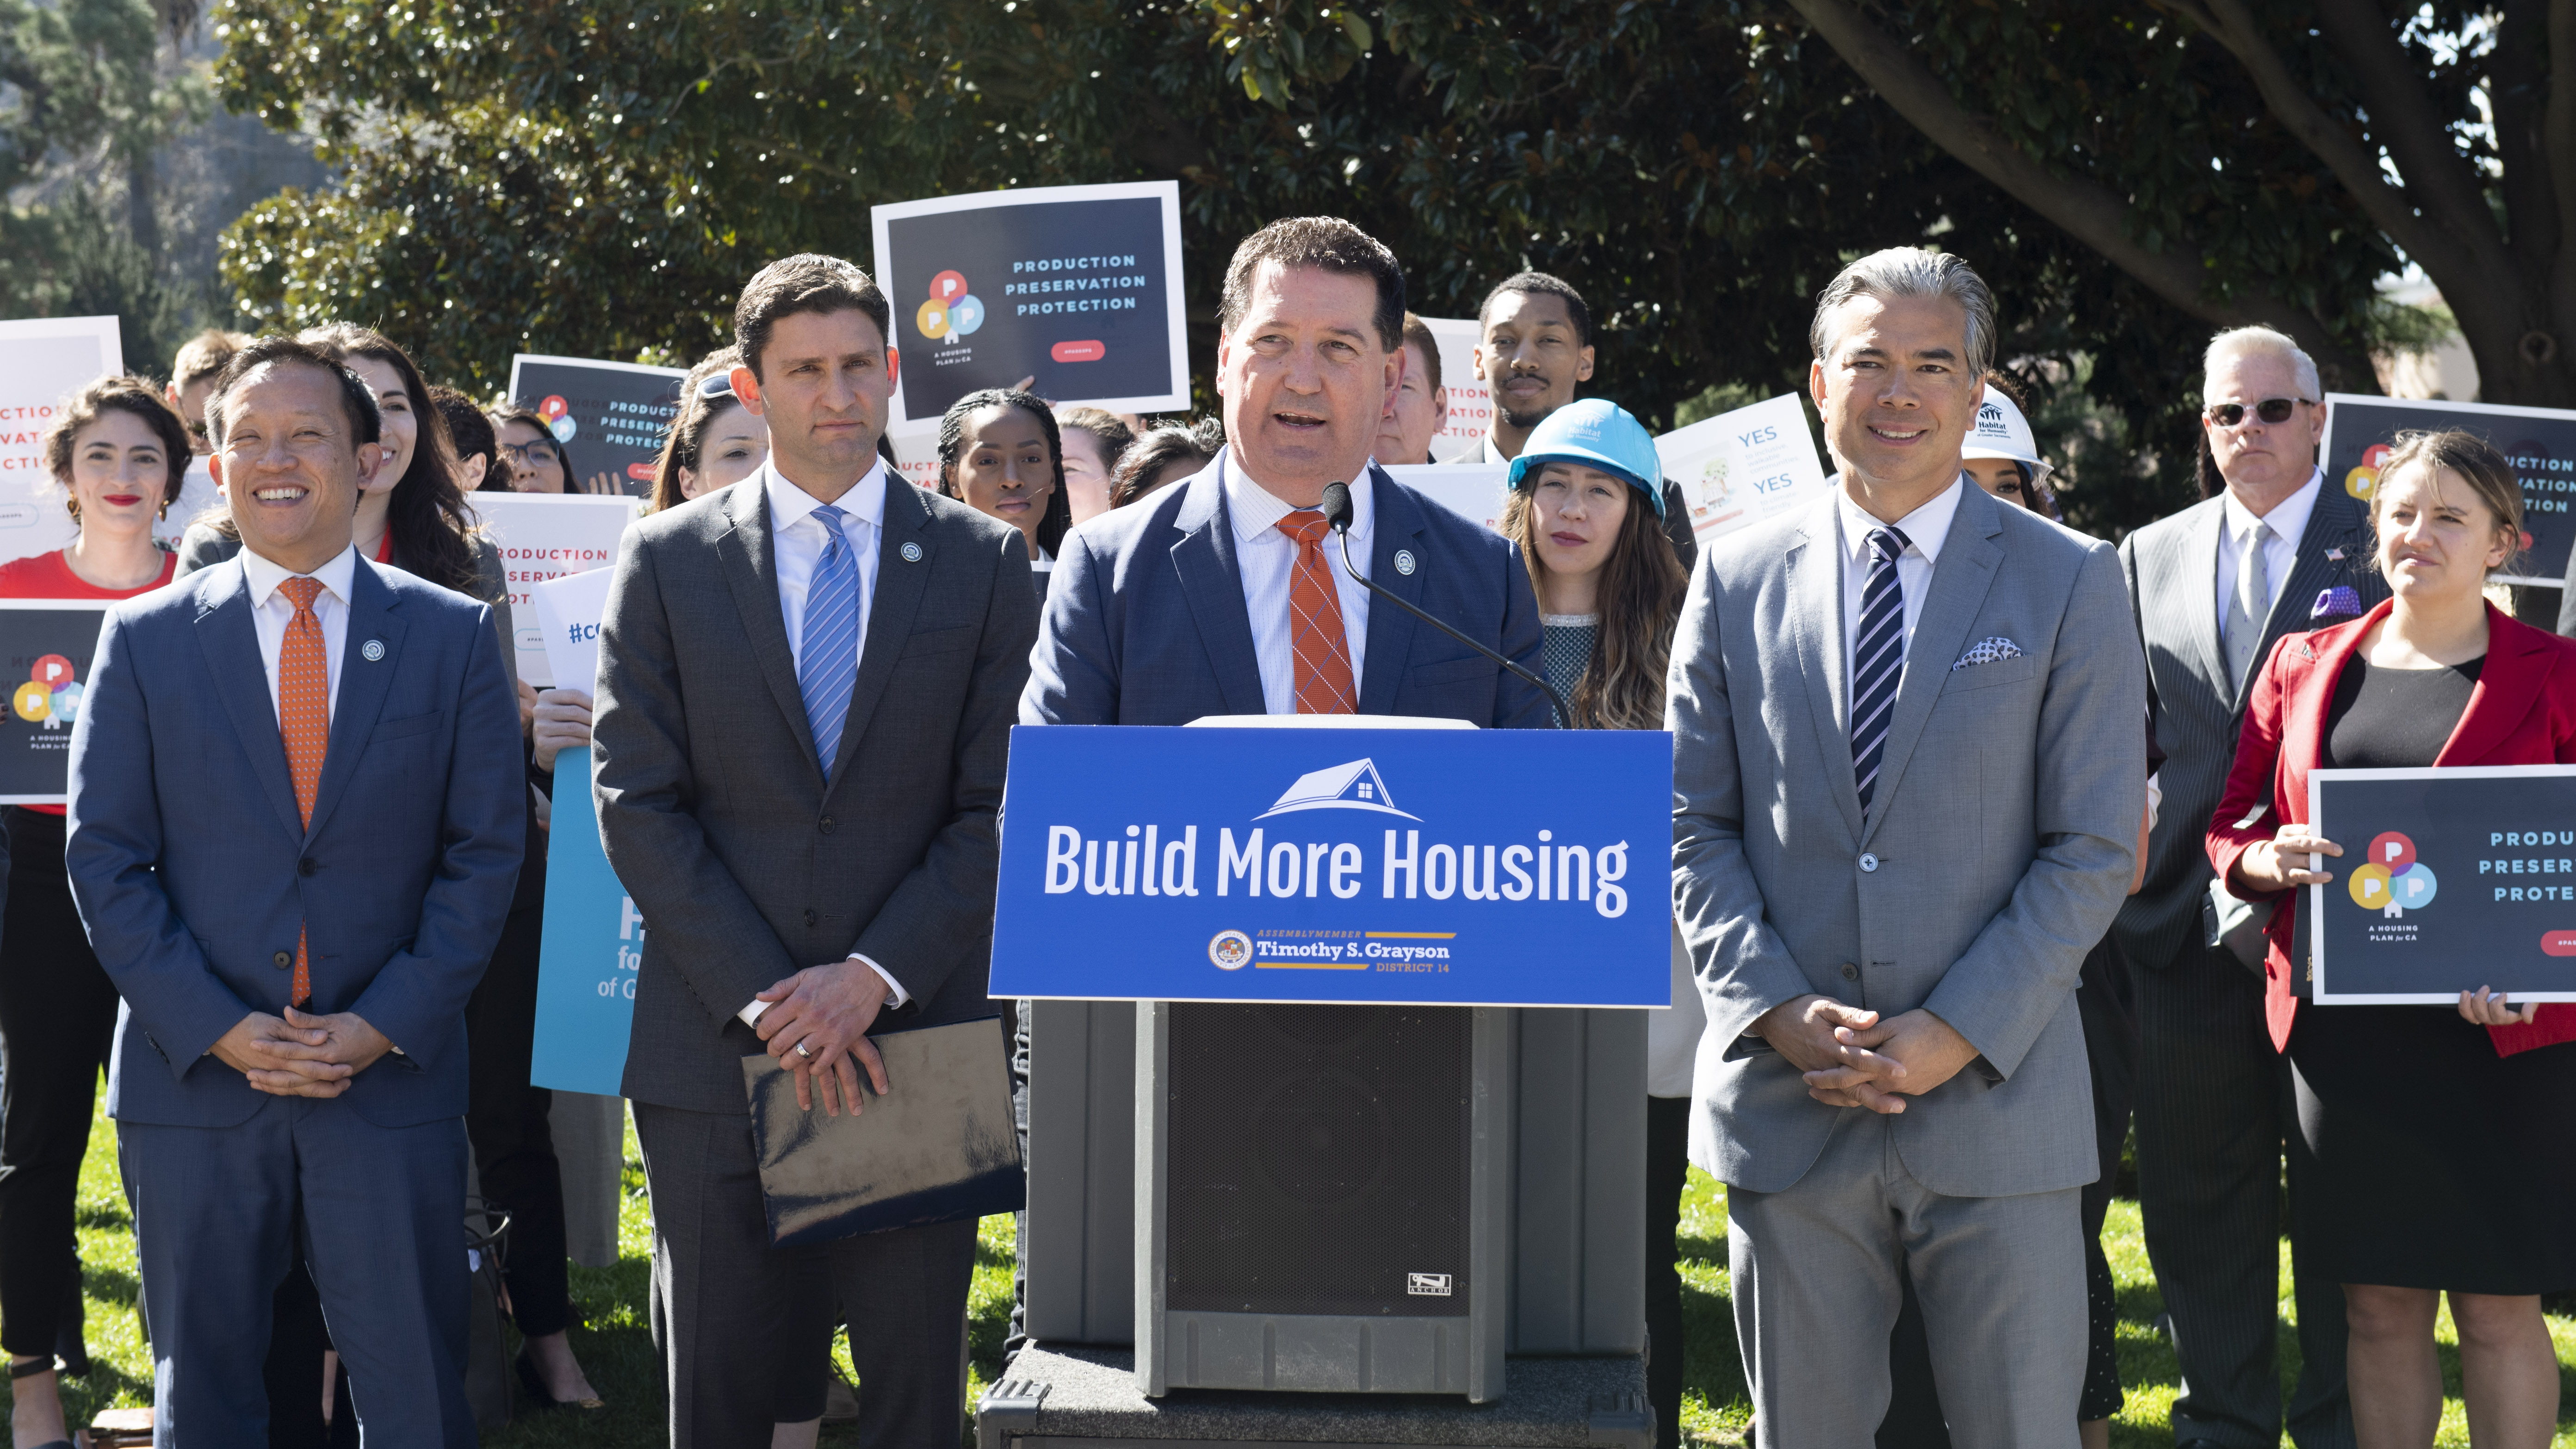 Assemblymember Grayson leads press conference announcing bills to spur housing production